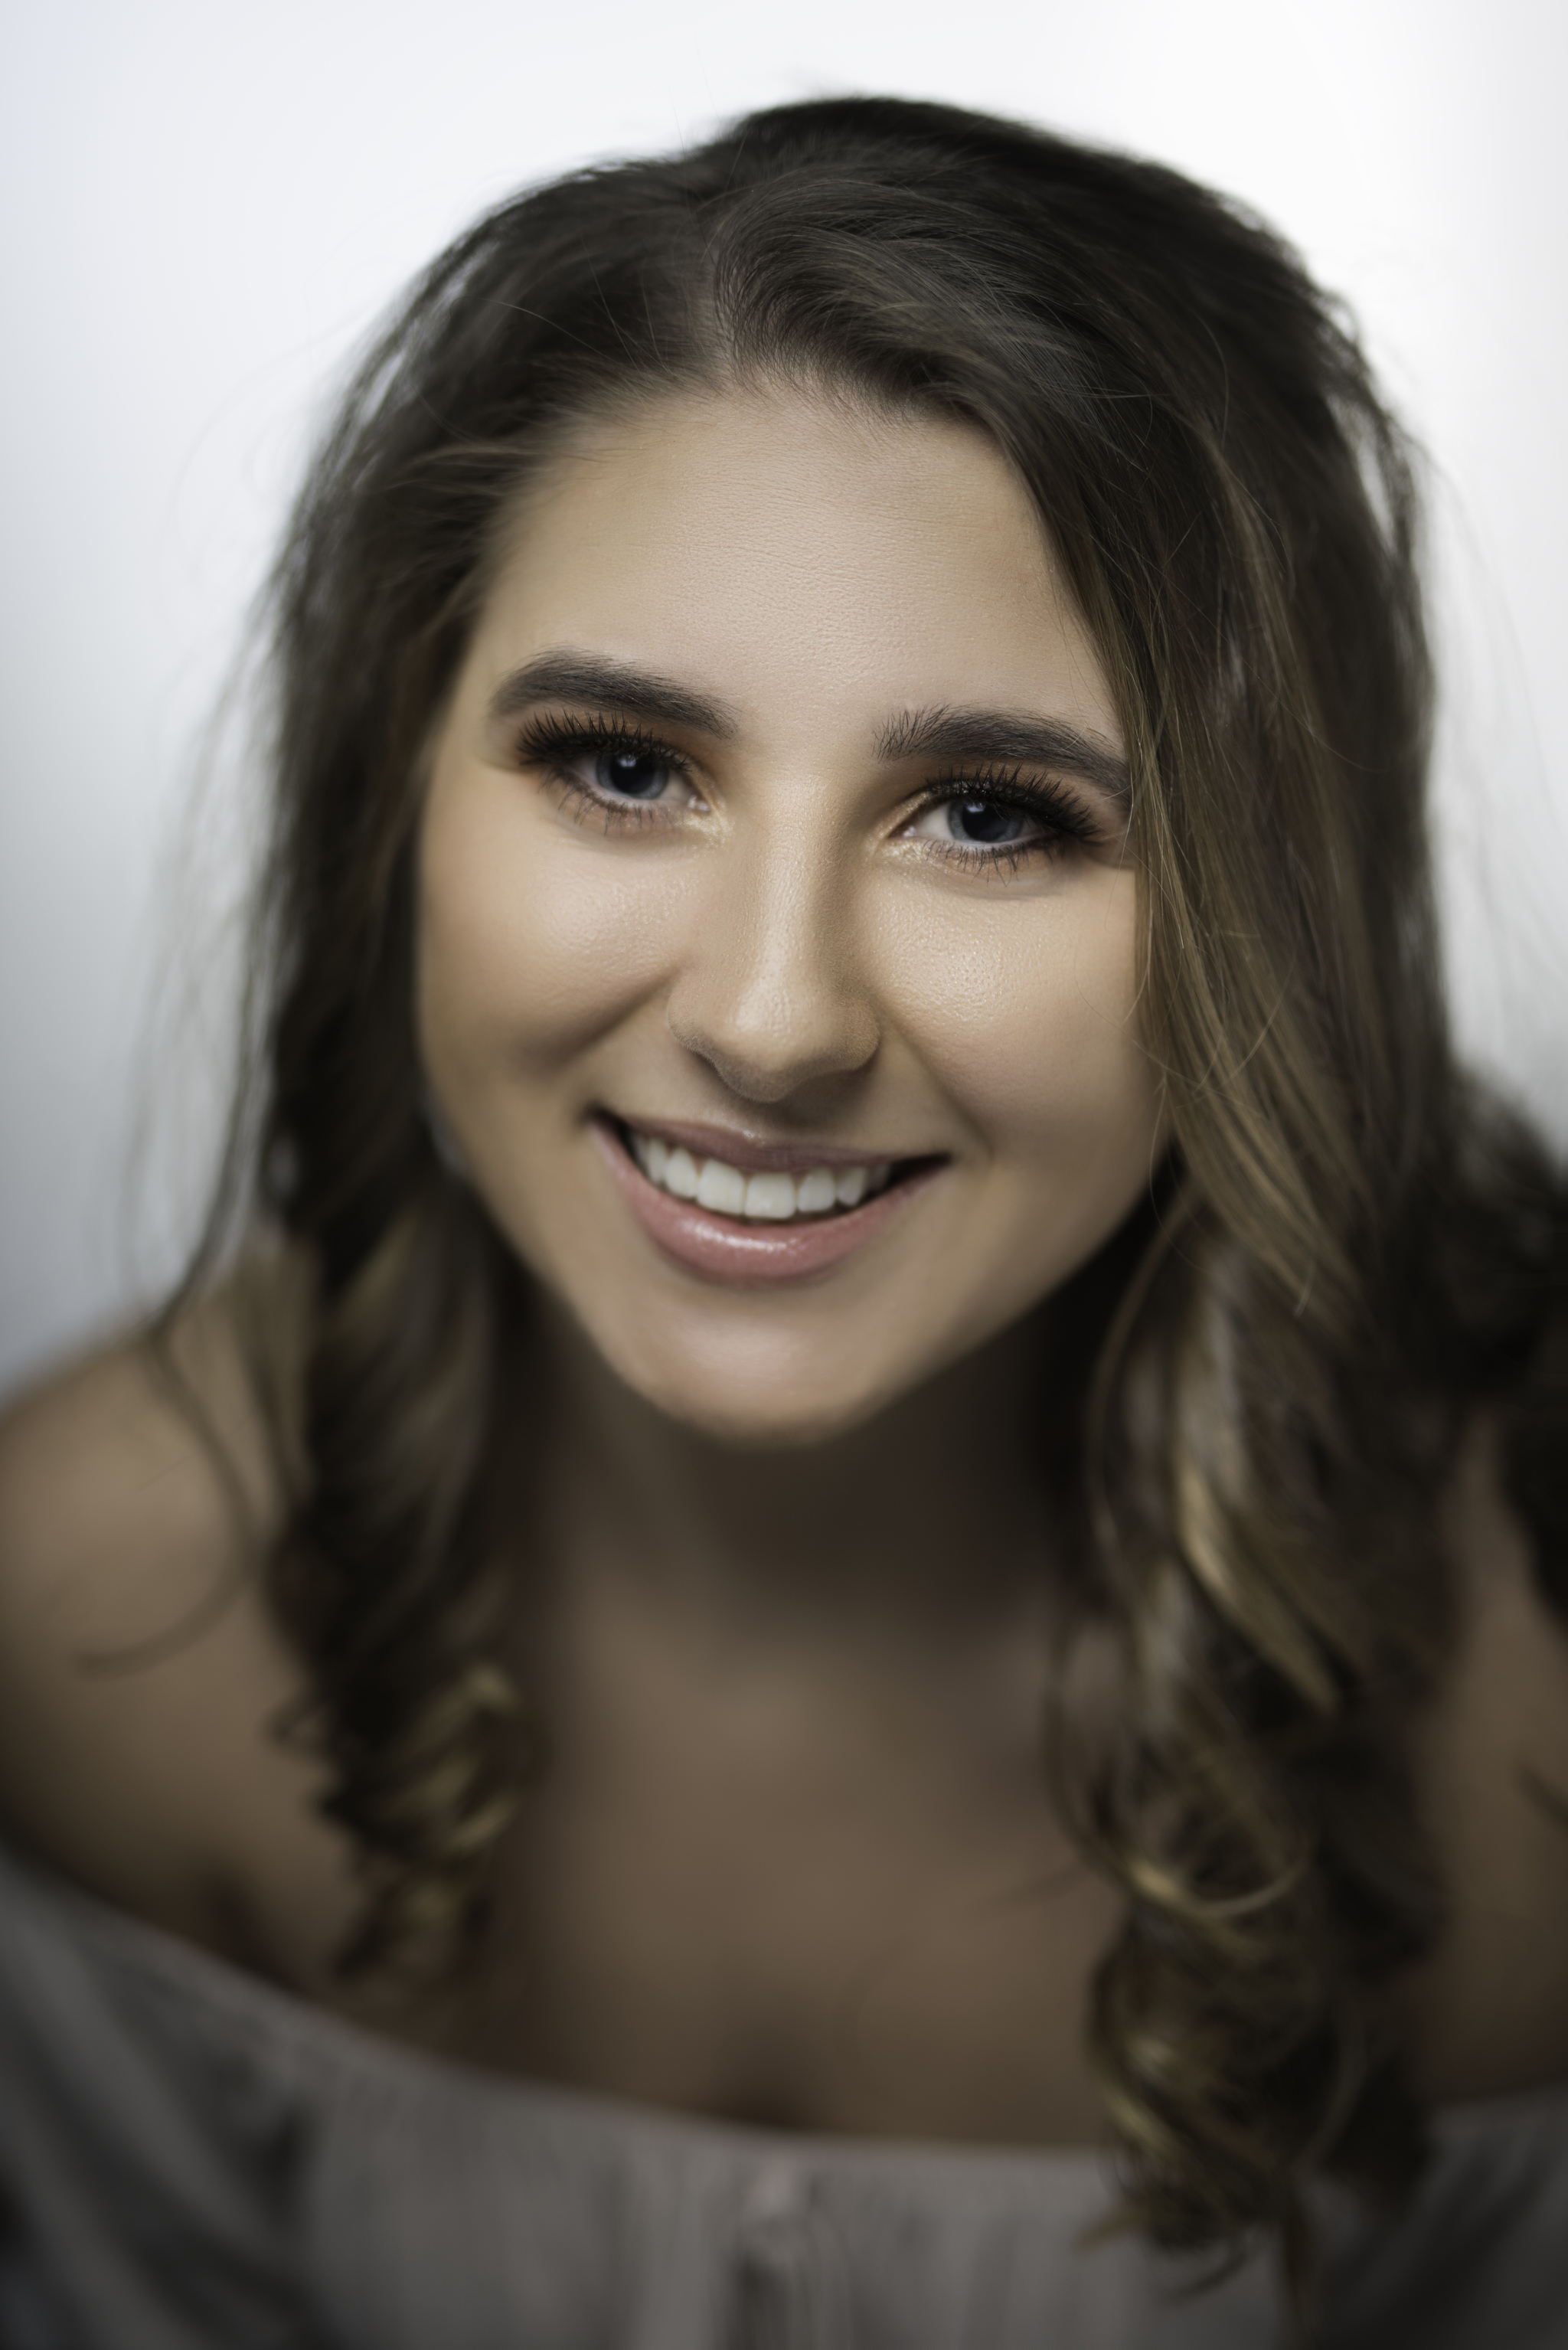 KCHS singer heads for NYC for a second time, adds Sydney performance